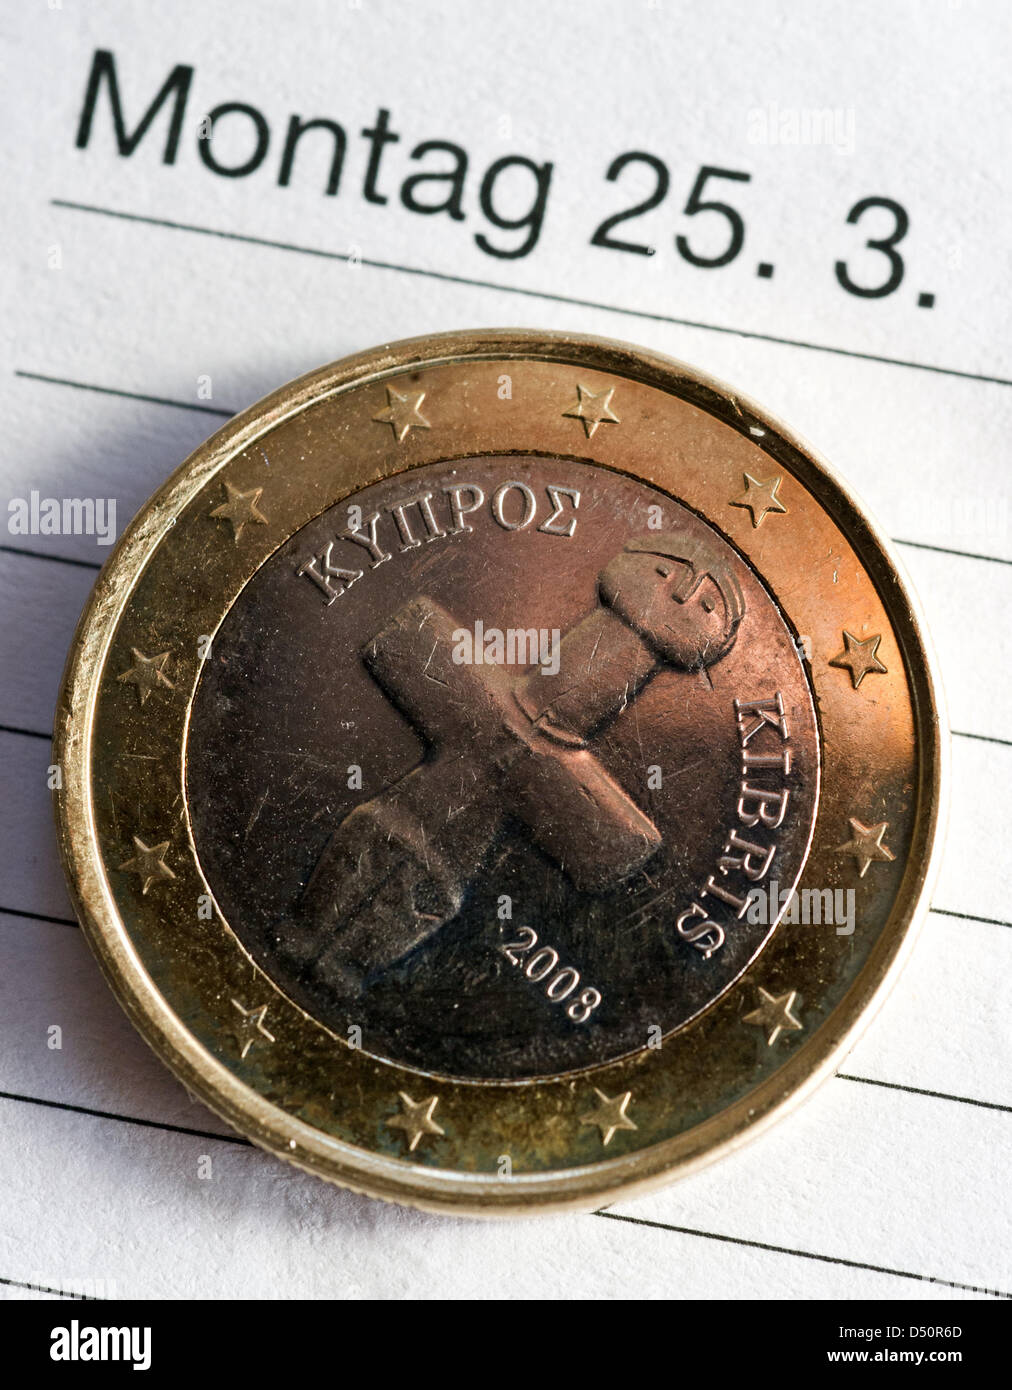 (ILLUSTRATION) An illustration dated 21 March 2013 shows a Cypriot 10 cents euro coin sitting on a calender next to the date Mondy, 25 March in Frankfurt Oder, Germany. After months of struggles, the EU has secured an aid package for Cyprus. The European Central bank has garanteed its financial package to Cyprus, but only until next Monday, according to the ECB in Frankfurt Main on Thursday. Photo: PATRICK PLUEL Stock Photo